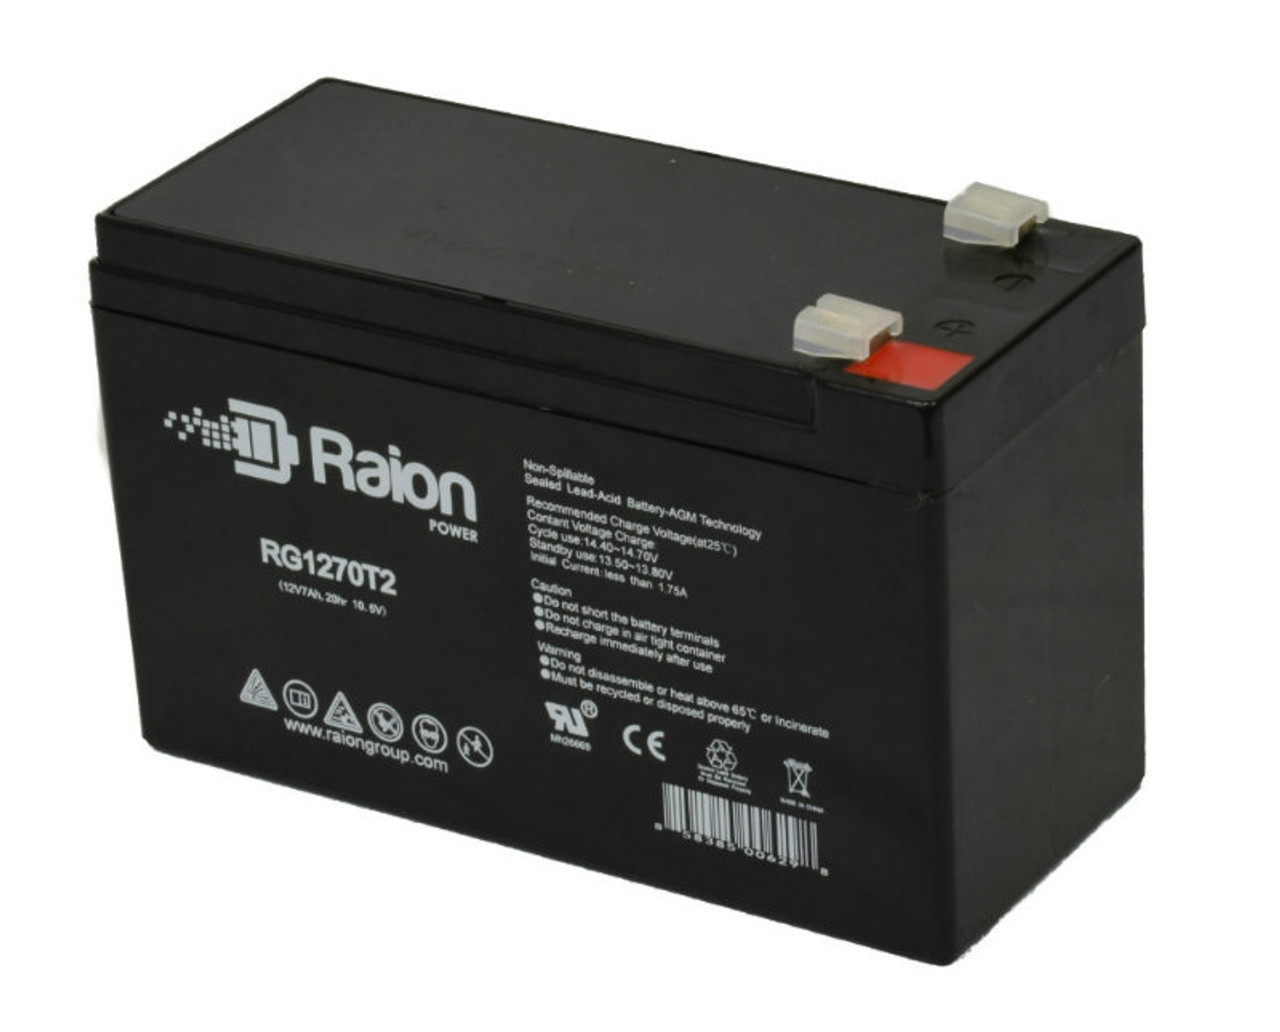 Raion Power RG1270T1 12V 7Ah Non-Spillable Replacement Battery for Leoch Battery LP12-7L